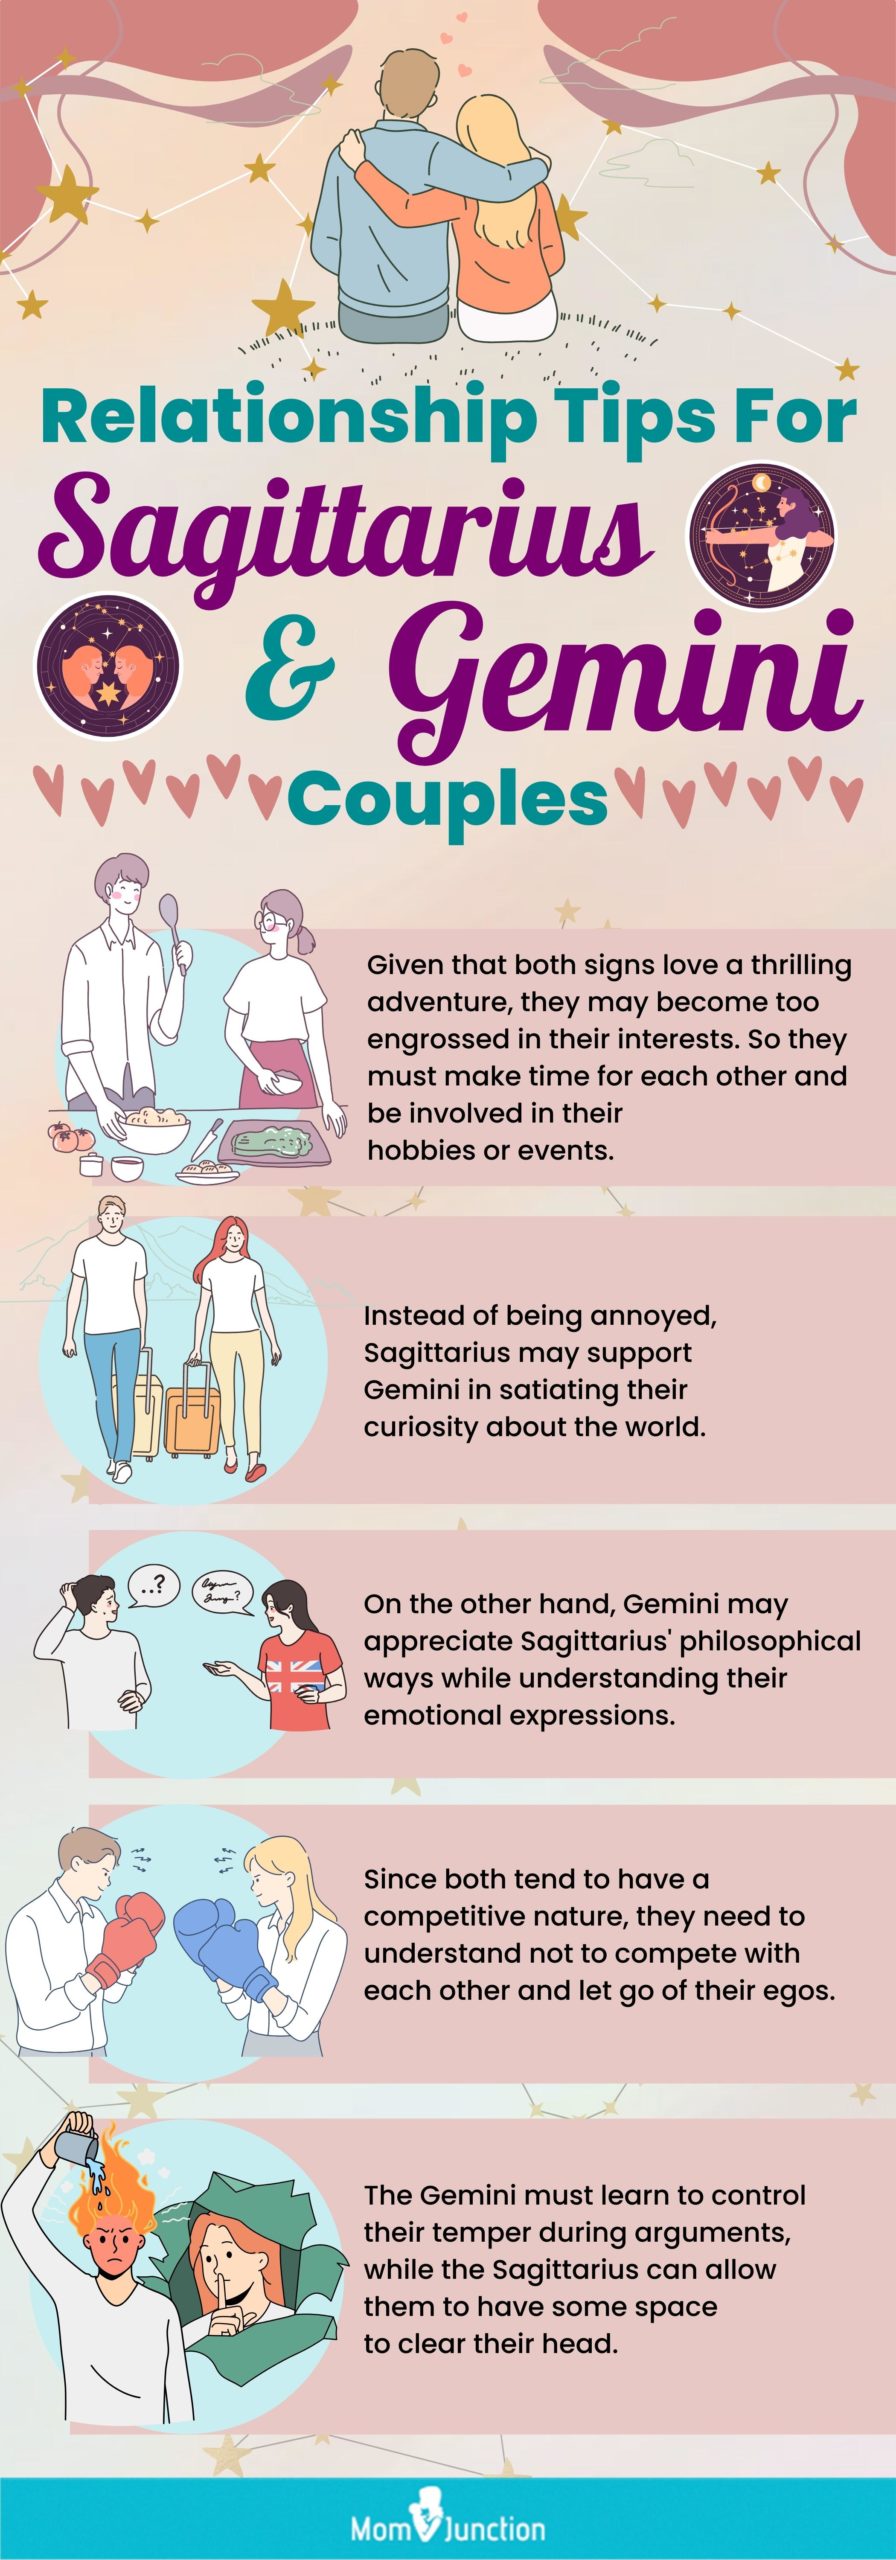 relationship tips for sagittarius and gemini couples [infographic]